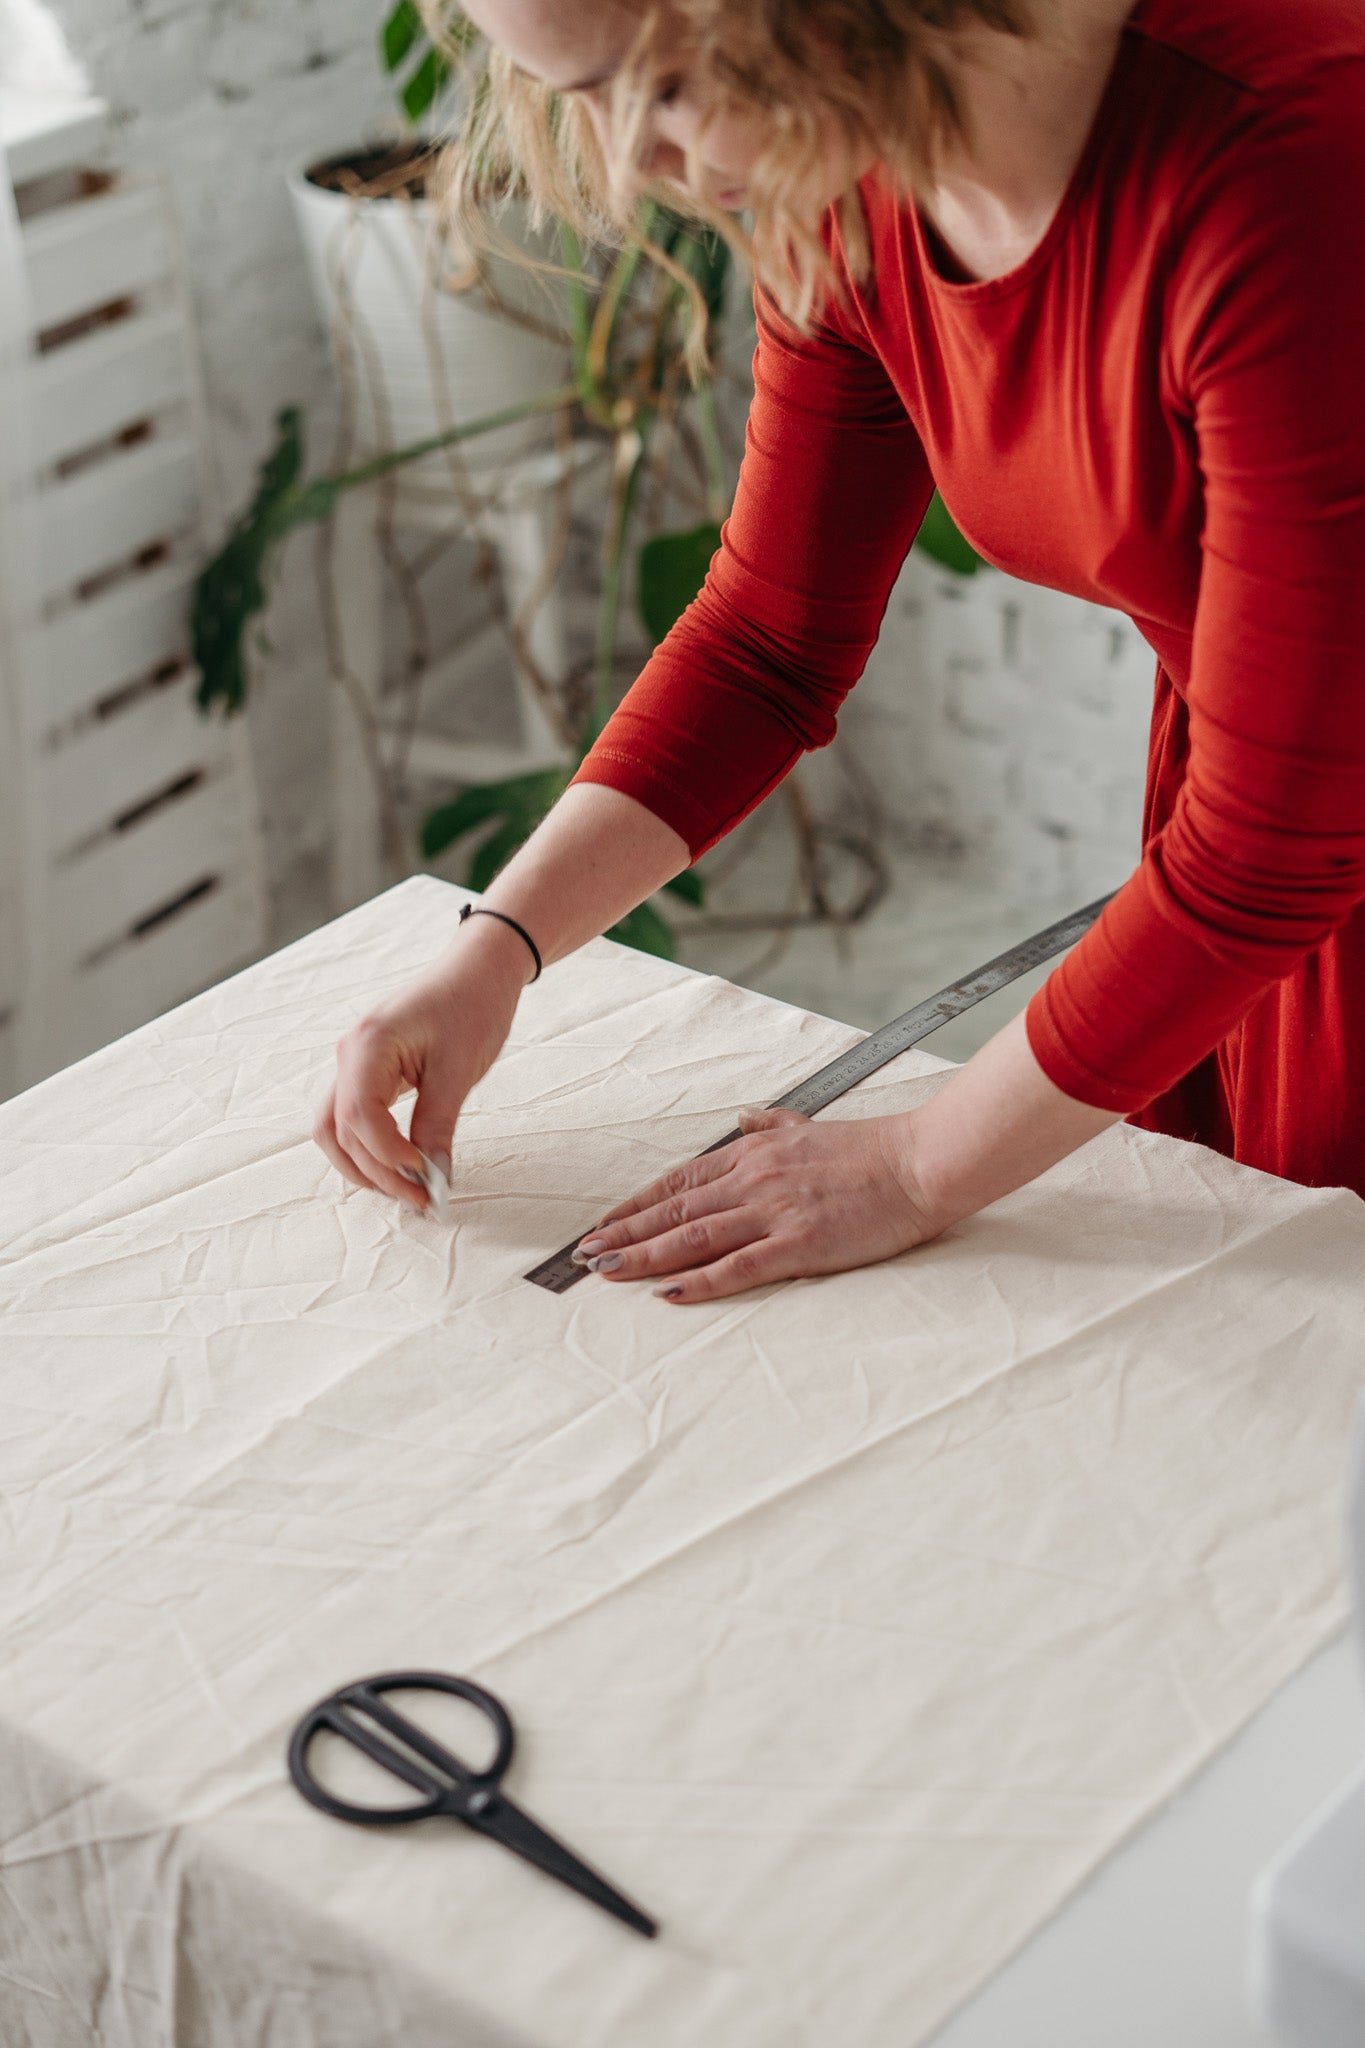 A woman in a red top is using tailors chalk to draw a pattern on canvas